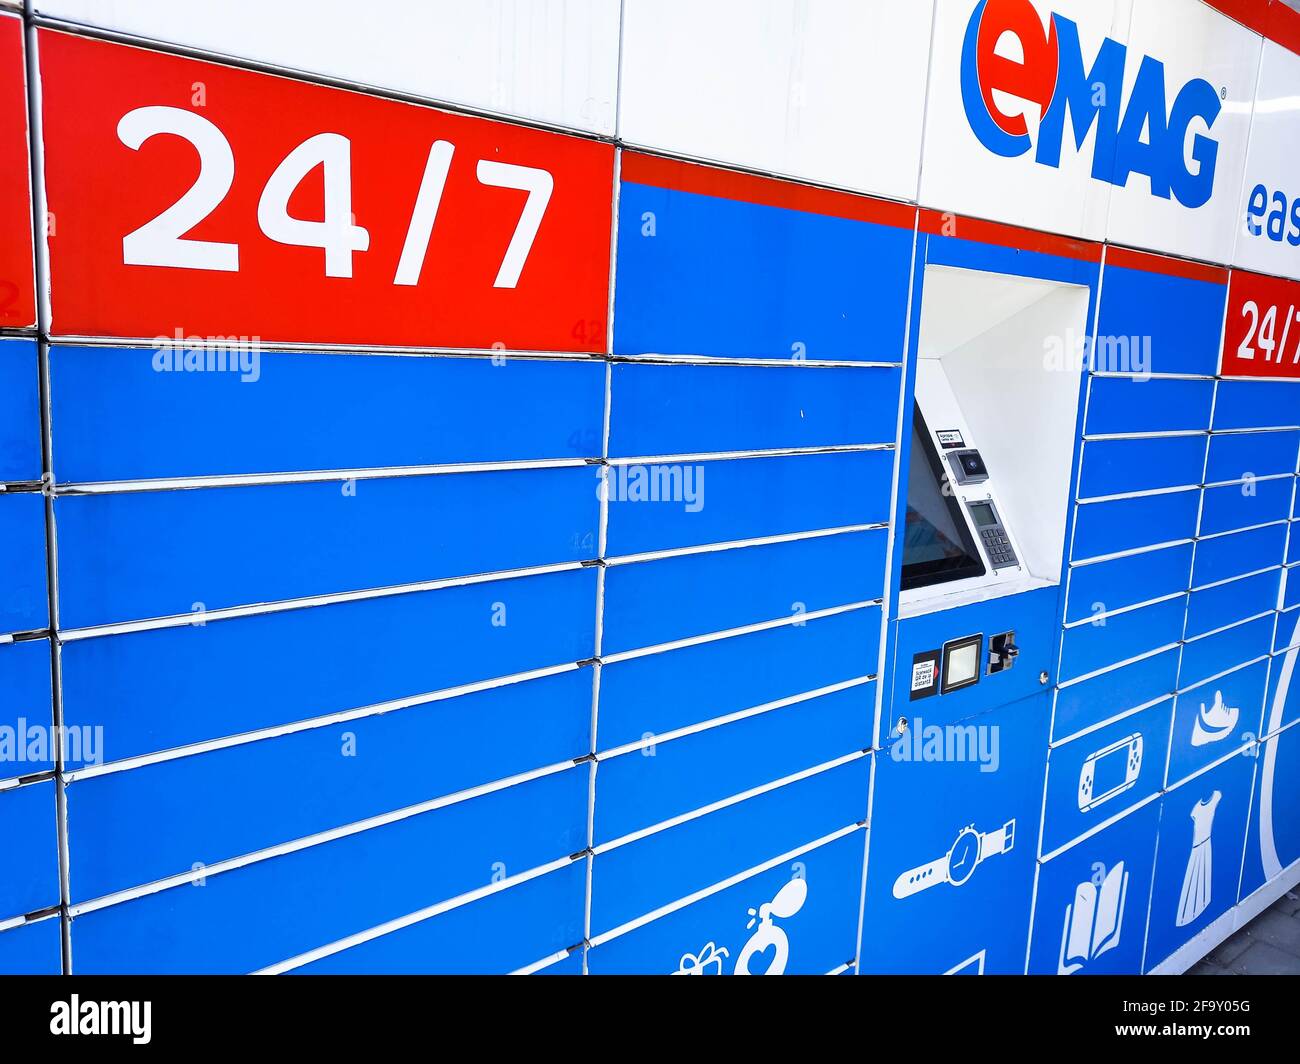 EMAG easybox pickup point in Bucharest, Romania, 2021 Stock Photo - Alamy